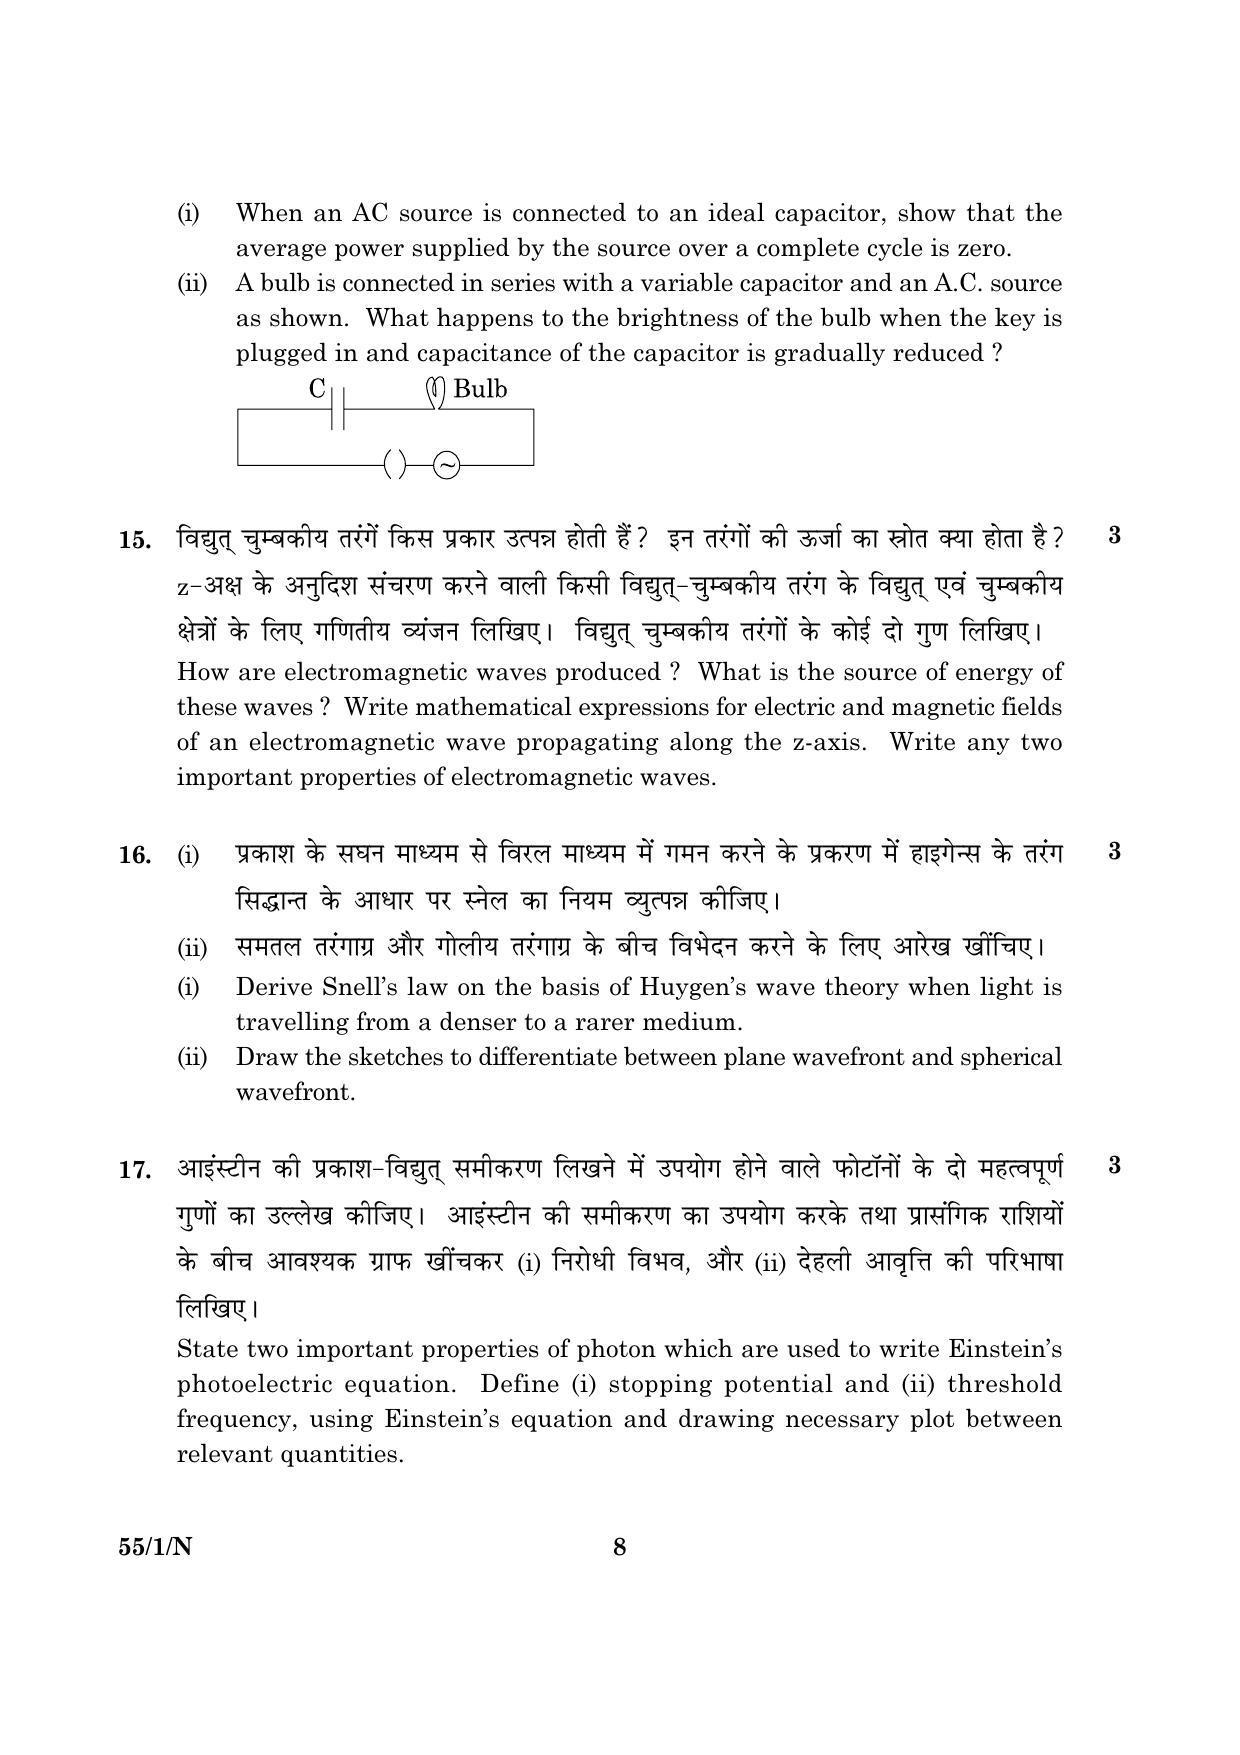 CBSE Class 12 055 Set 1 N Physics Theory 2016 Question Paper - Page 8